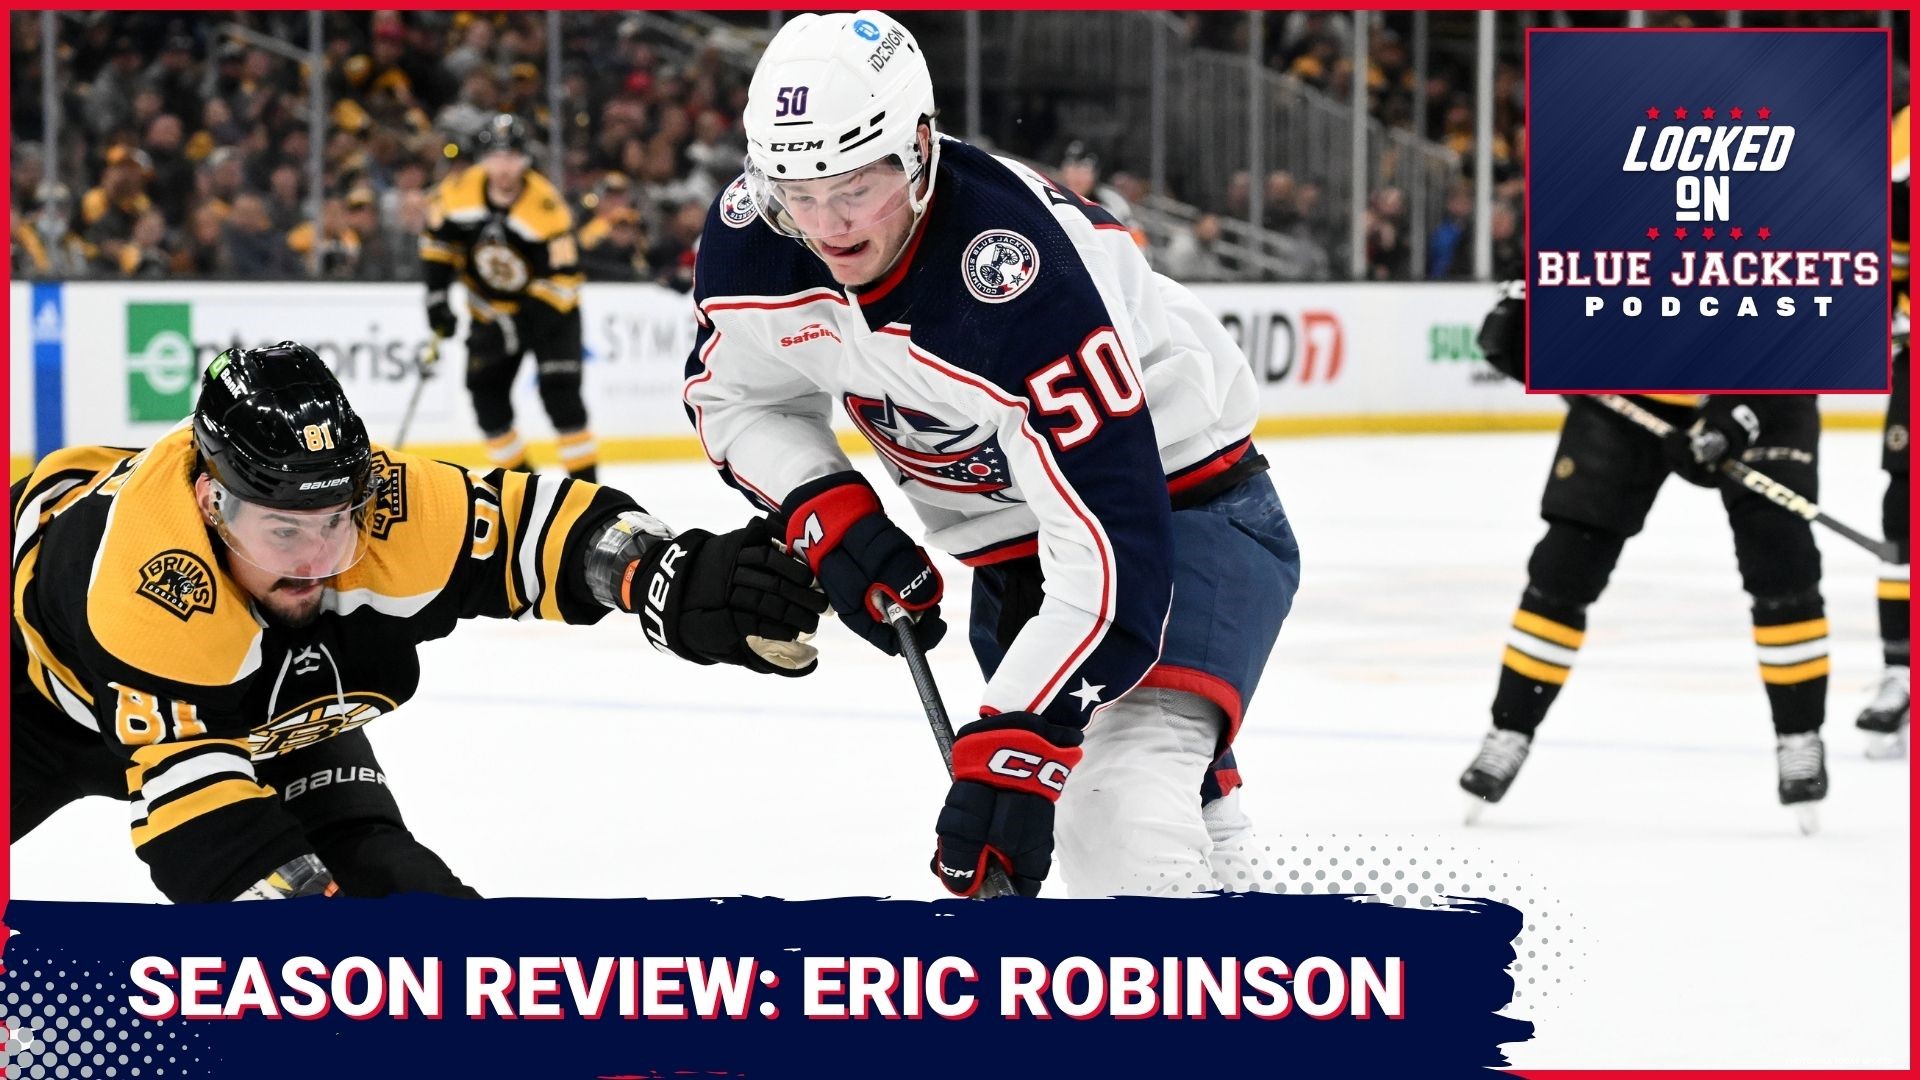 Today we're looking at Eric Robinson's season, how that fourth line worked, what his ceiling could be, and whether he'll be a Blue Jacket after his contract finishes